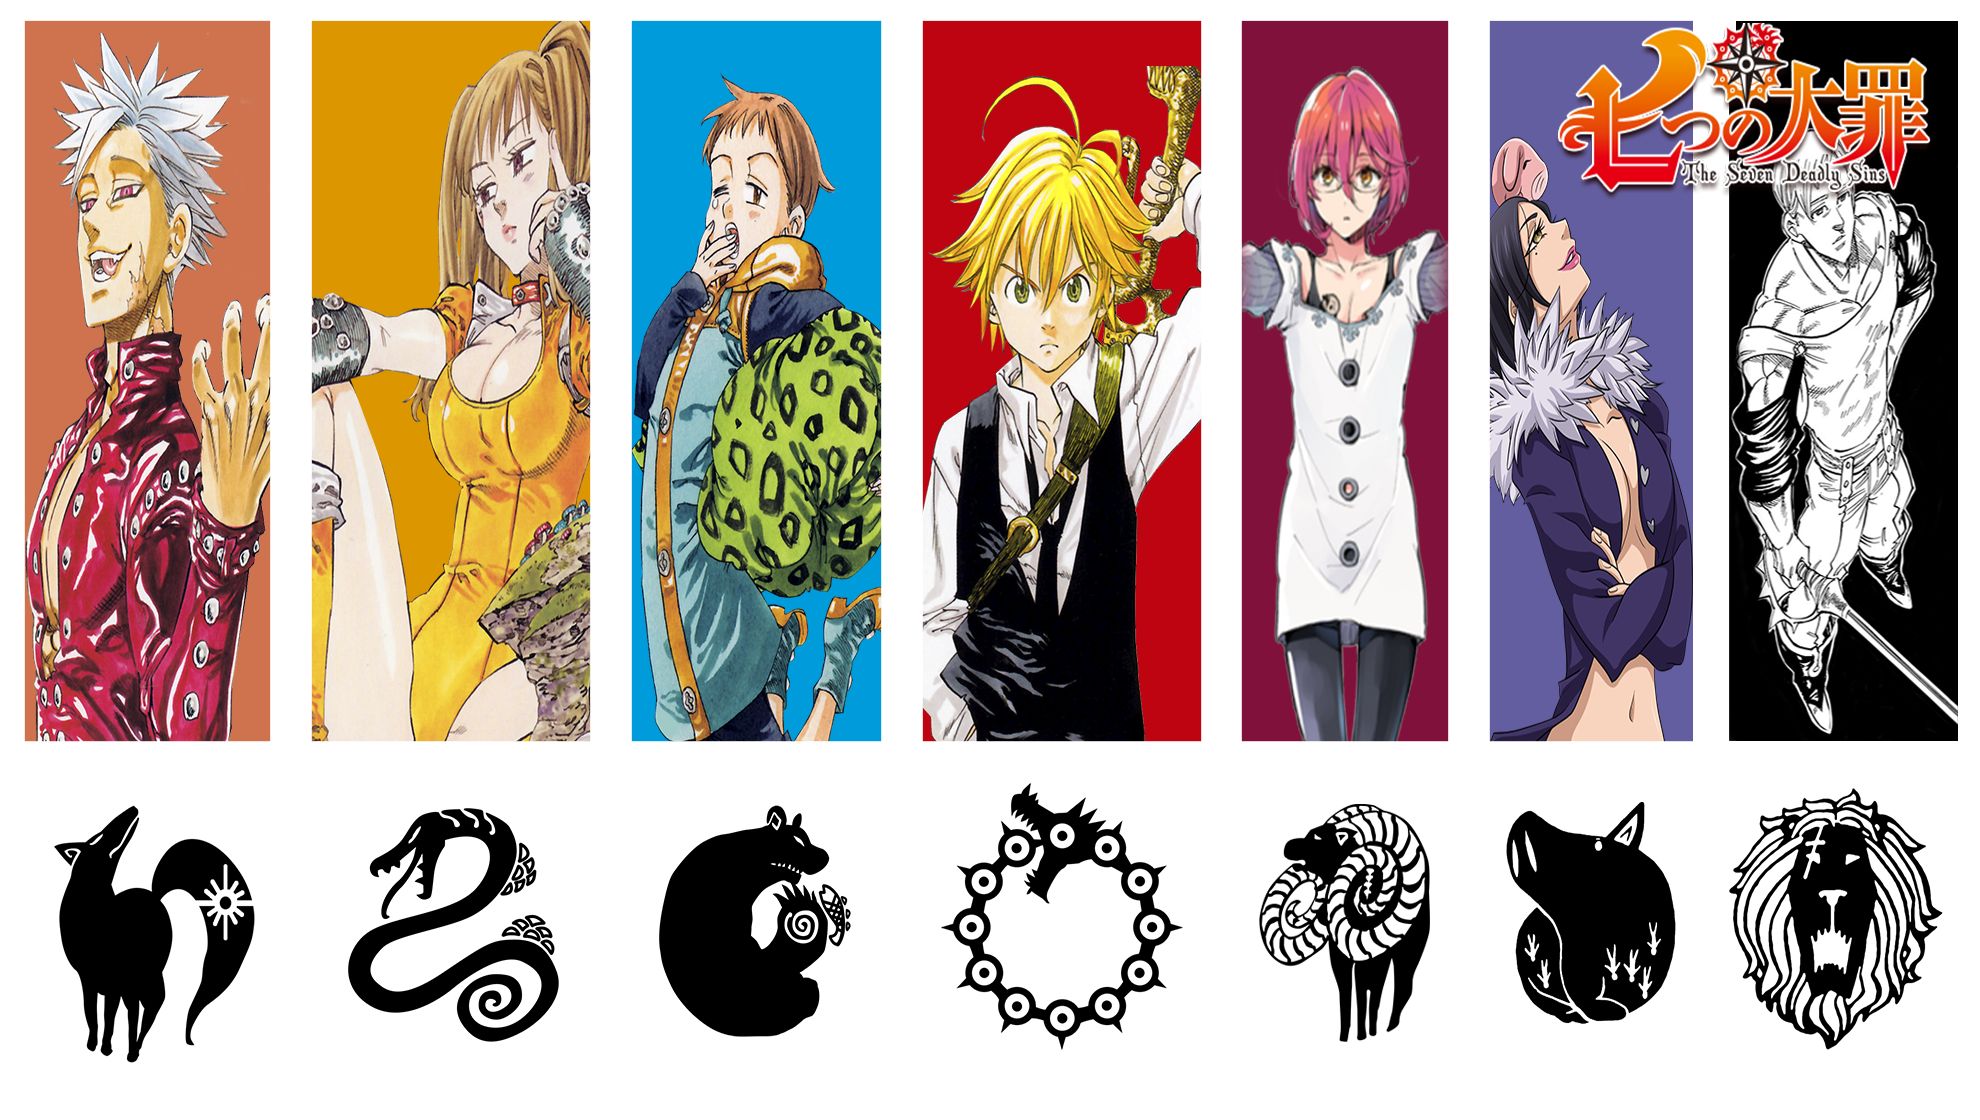 gowther (the seven deadly sins), anime, the seven deadly sins, ban (the seven deadly sins), diane (the seven deadly sins), escanor (the seven deadly sins), king (the seven deadly sins), meliodas (the seven deadly sins), merlin (the seven deadly sins)